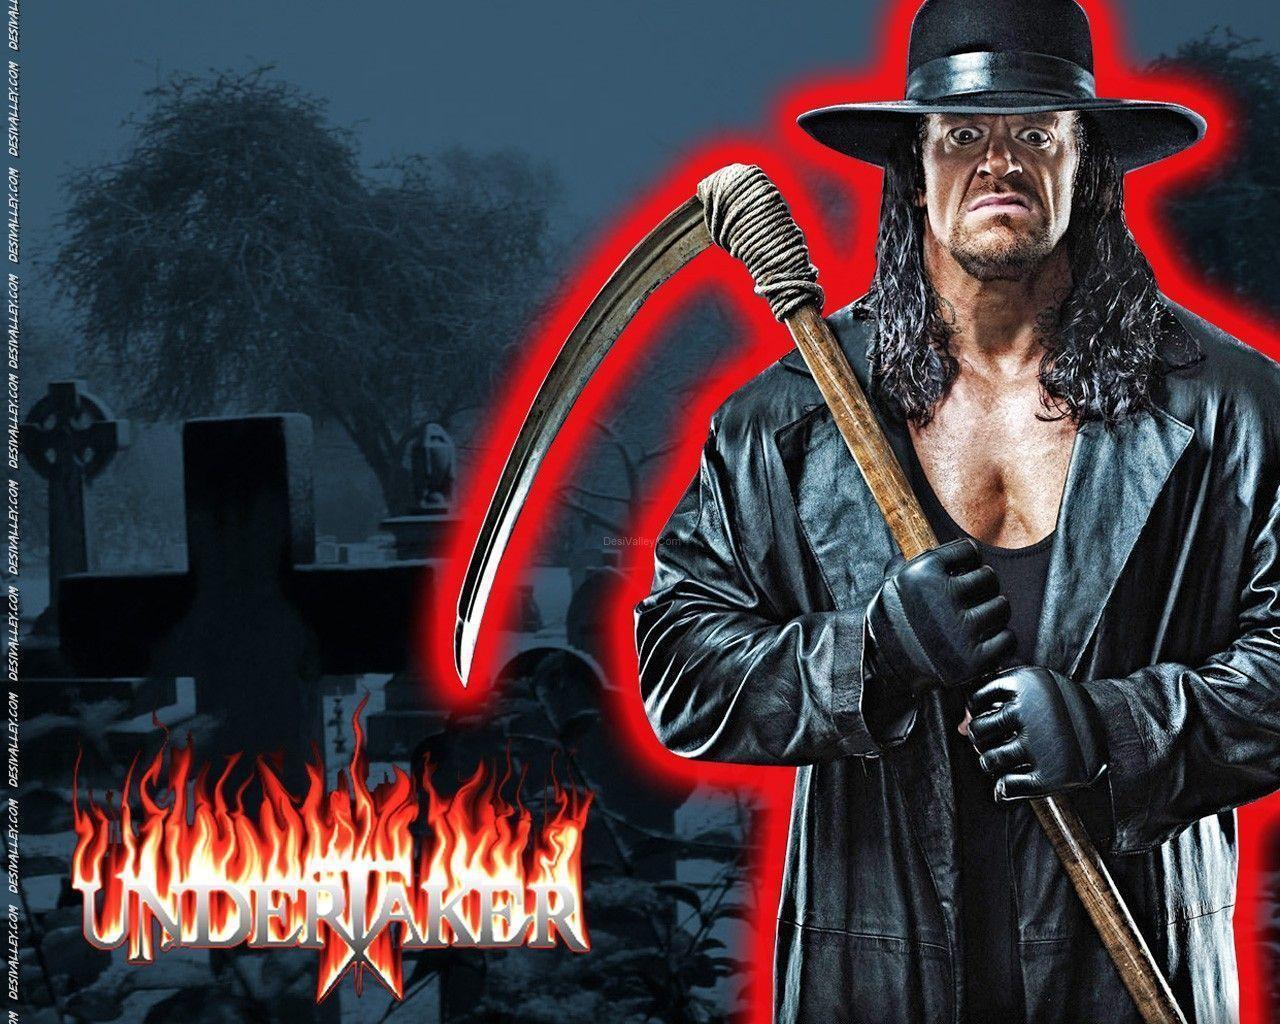 wwe undertaker new HD image Wallpapers newHD Wallpapers new